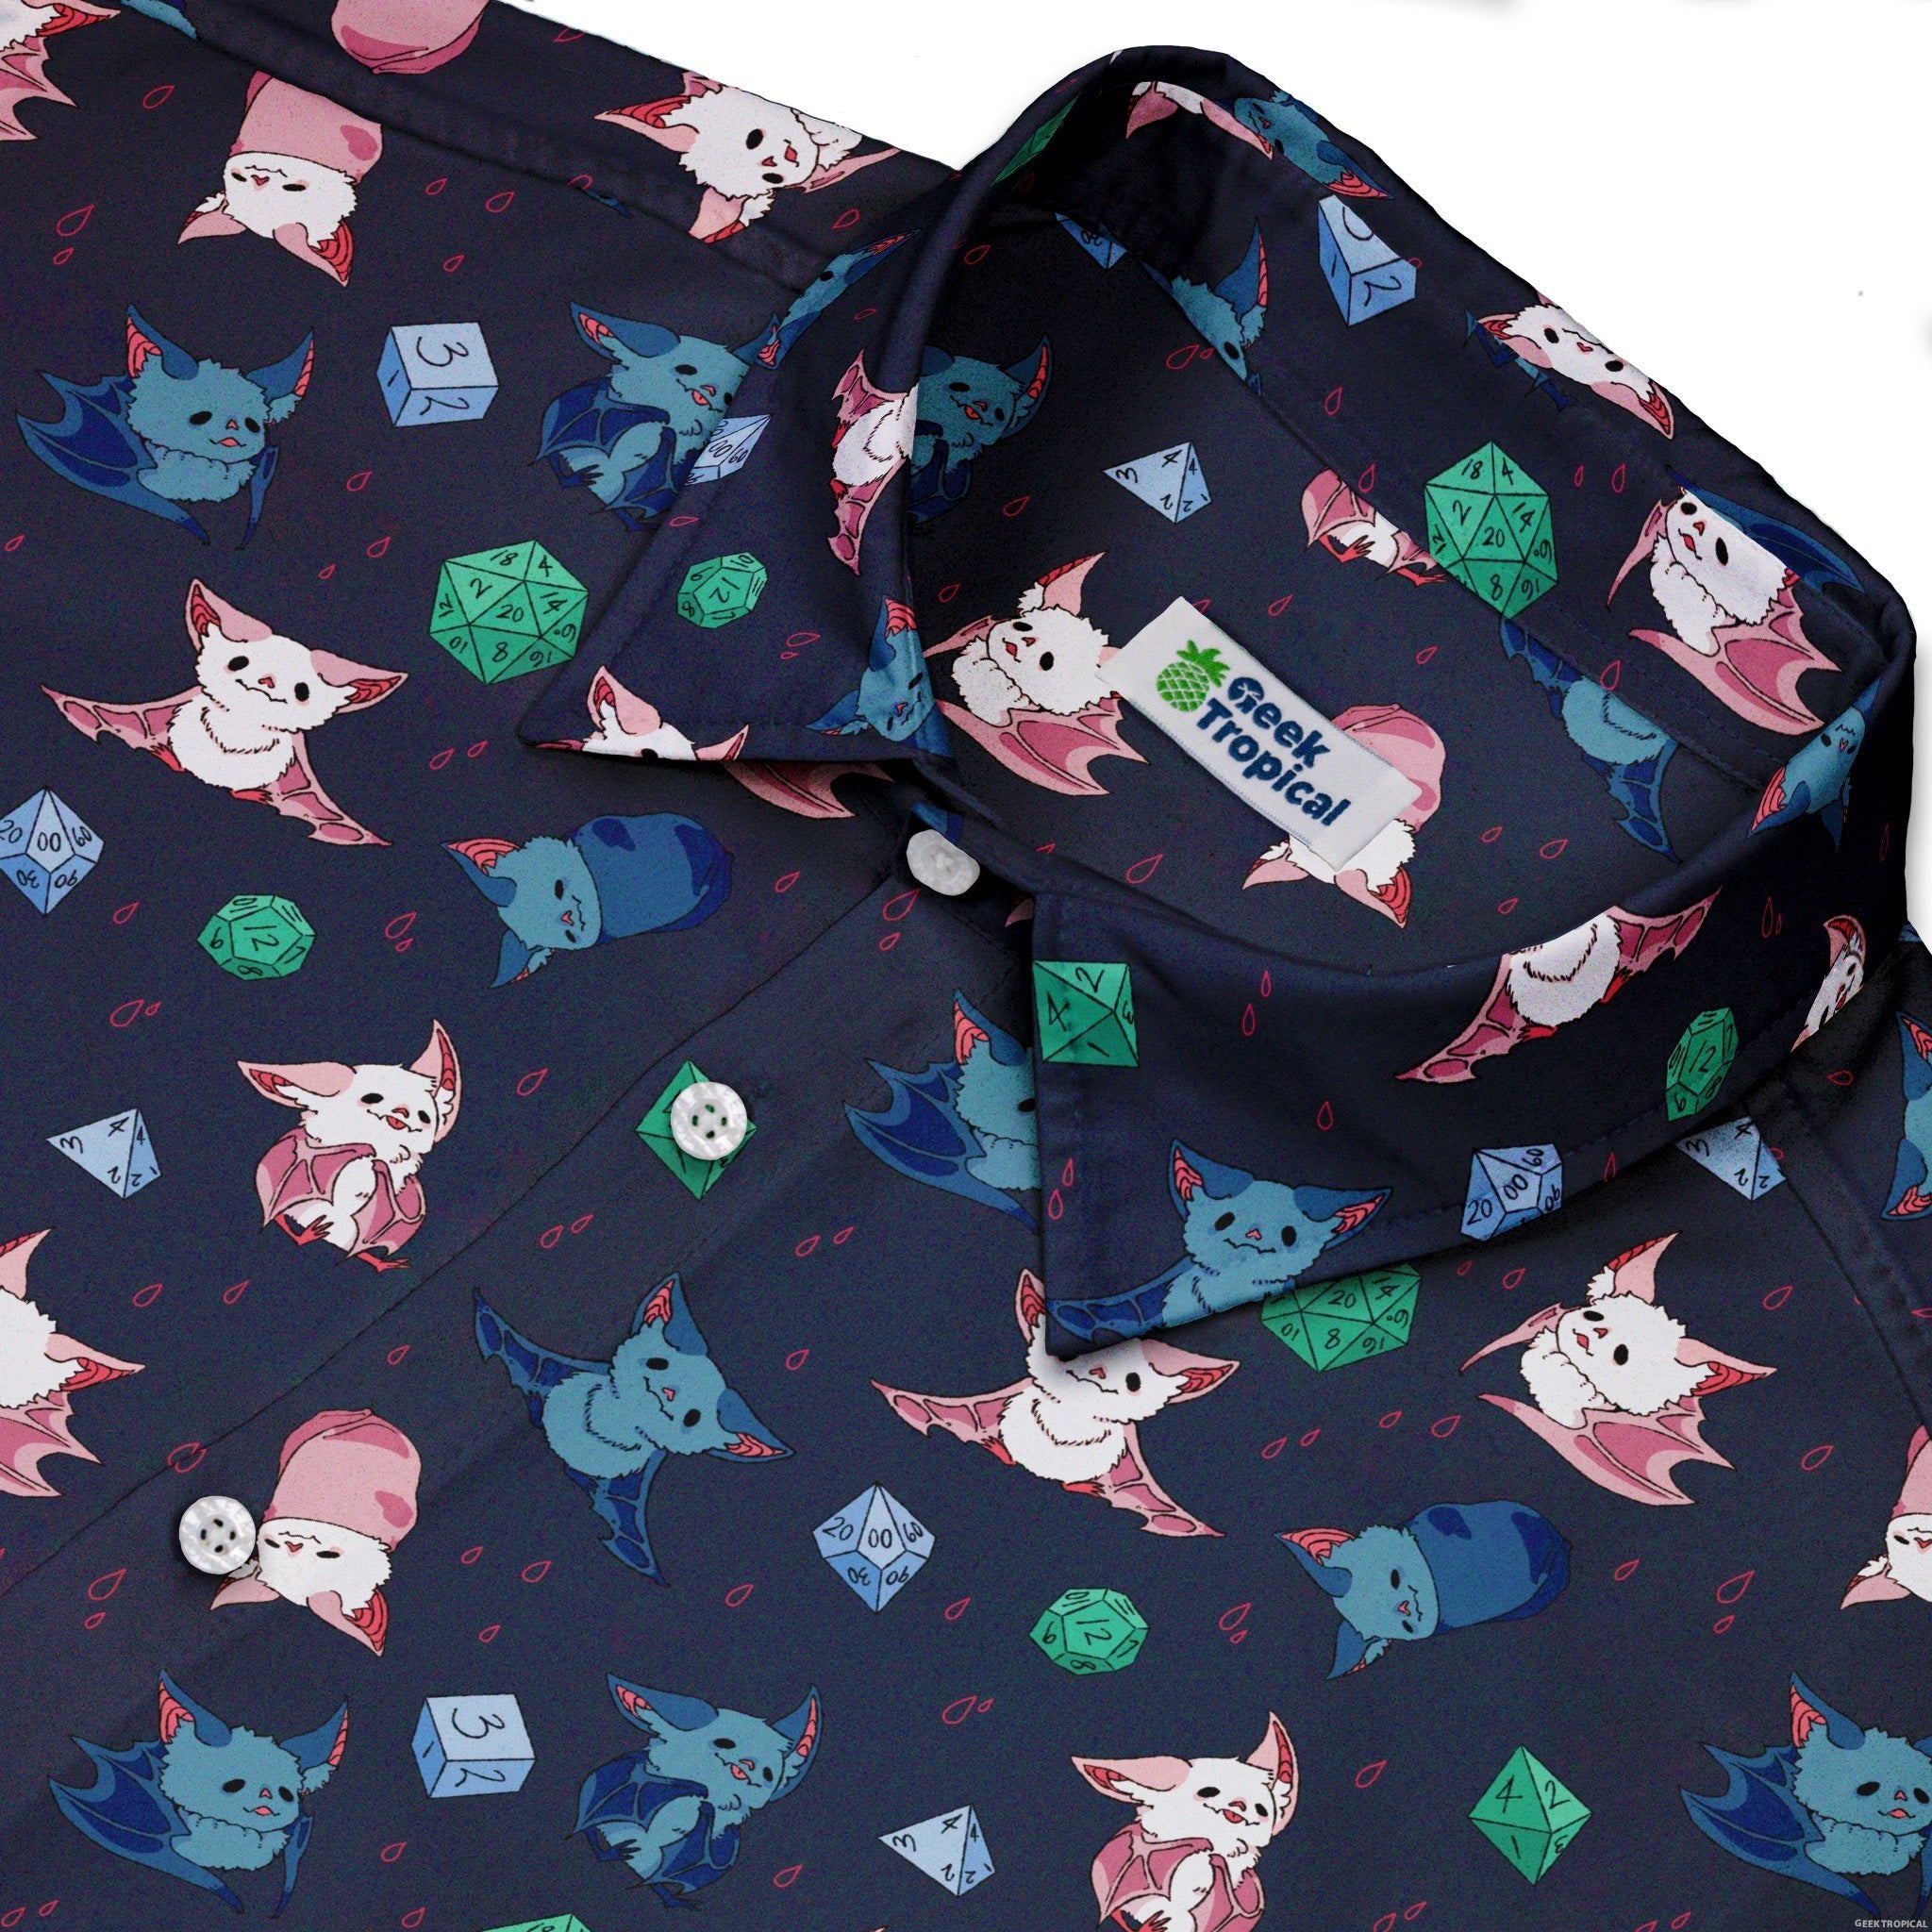 Dnd Bat Familiars Button Up Shirt - adult sizing - Design by Ardi Tong - dnd & rpg print